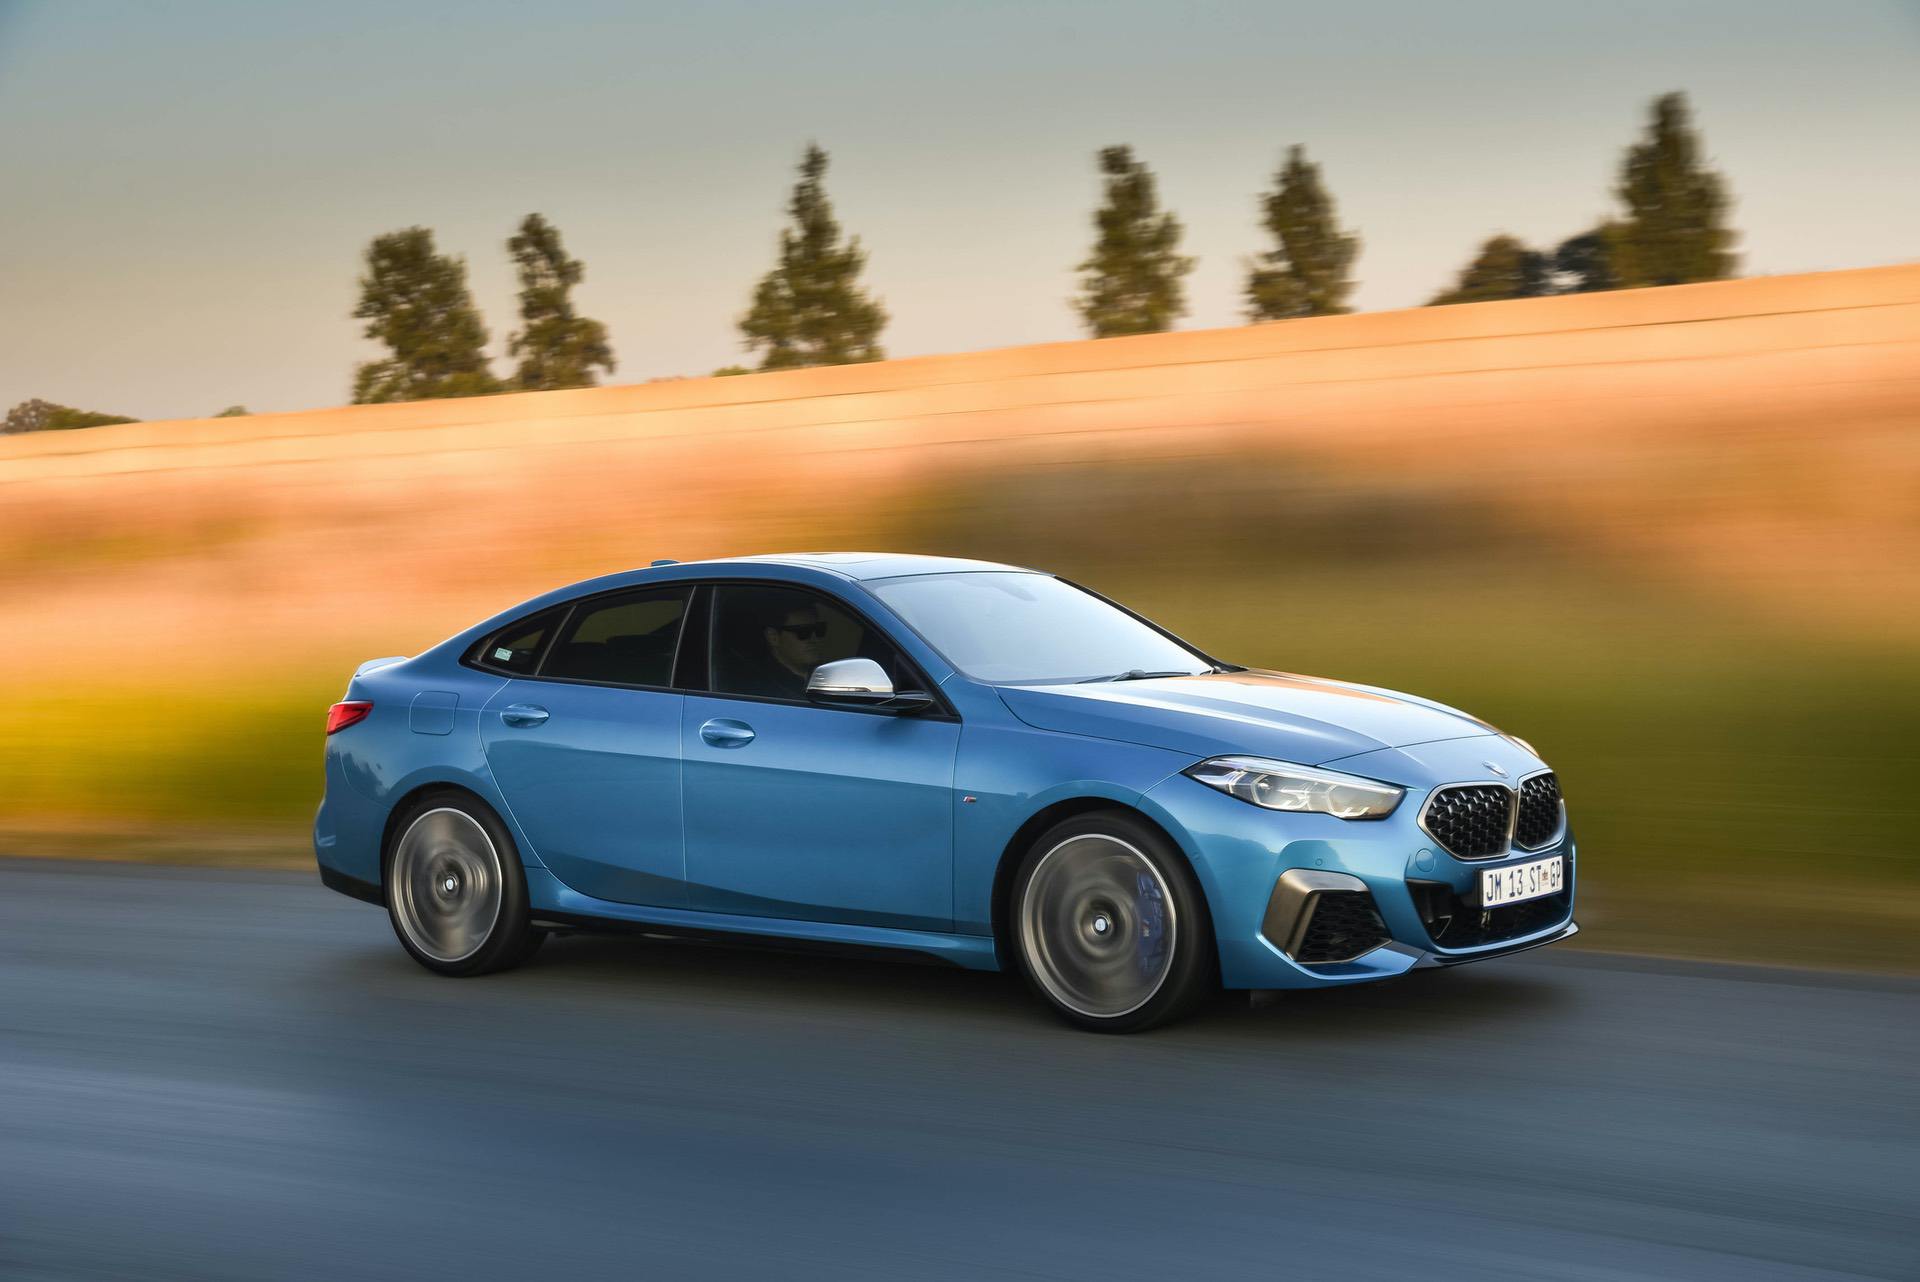 The new BMW 2 Series Gran Coupe launches in South Africa